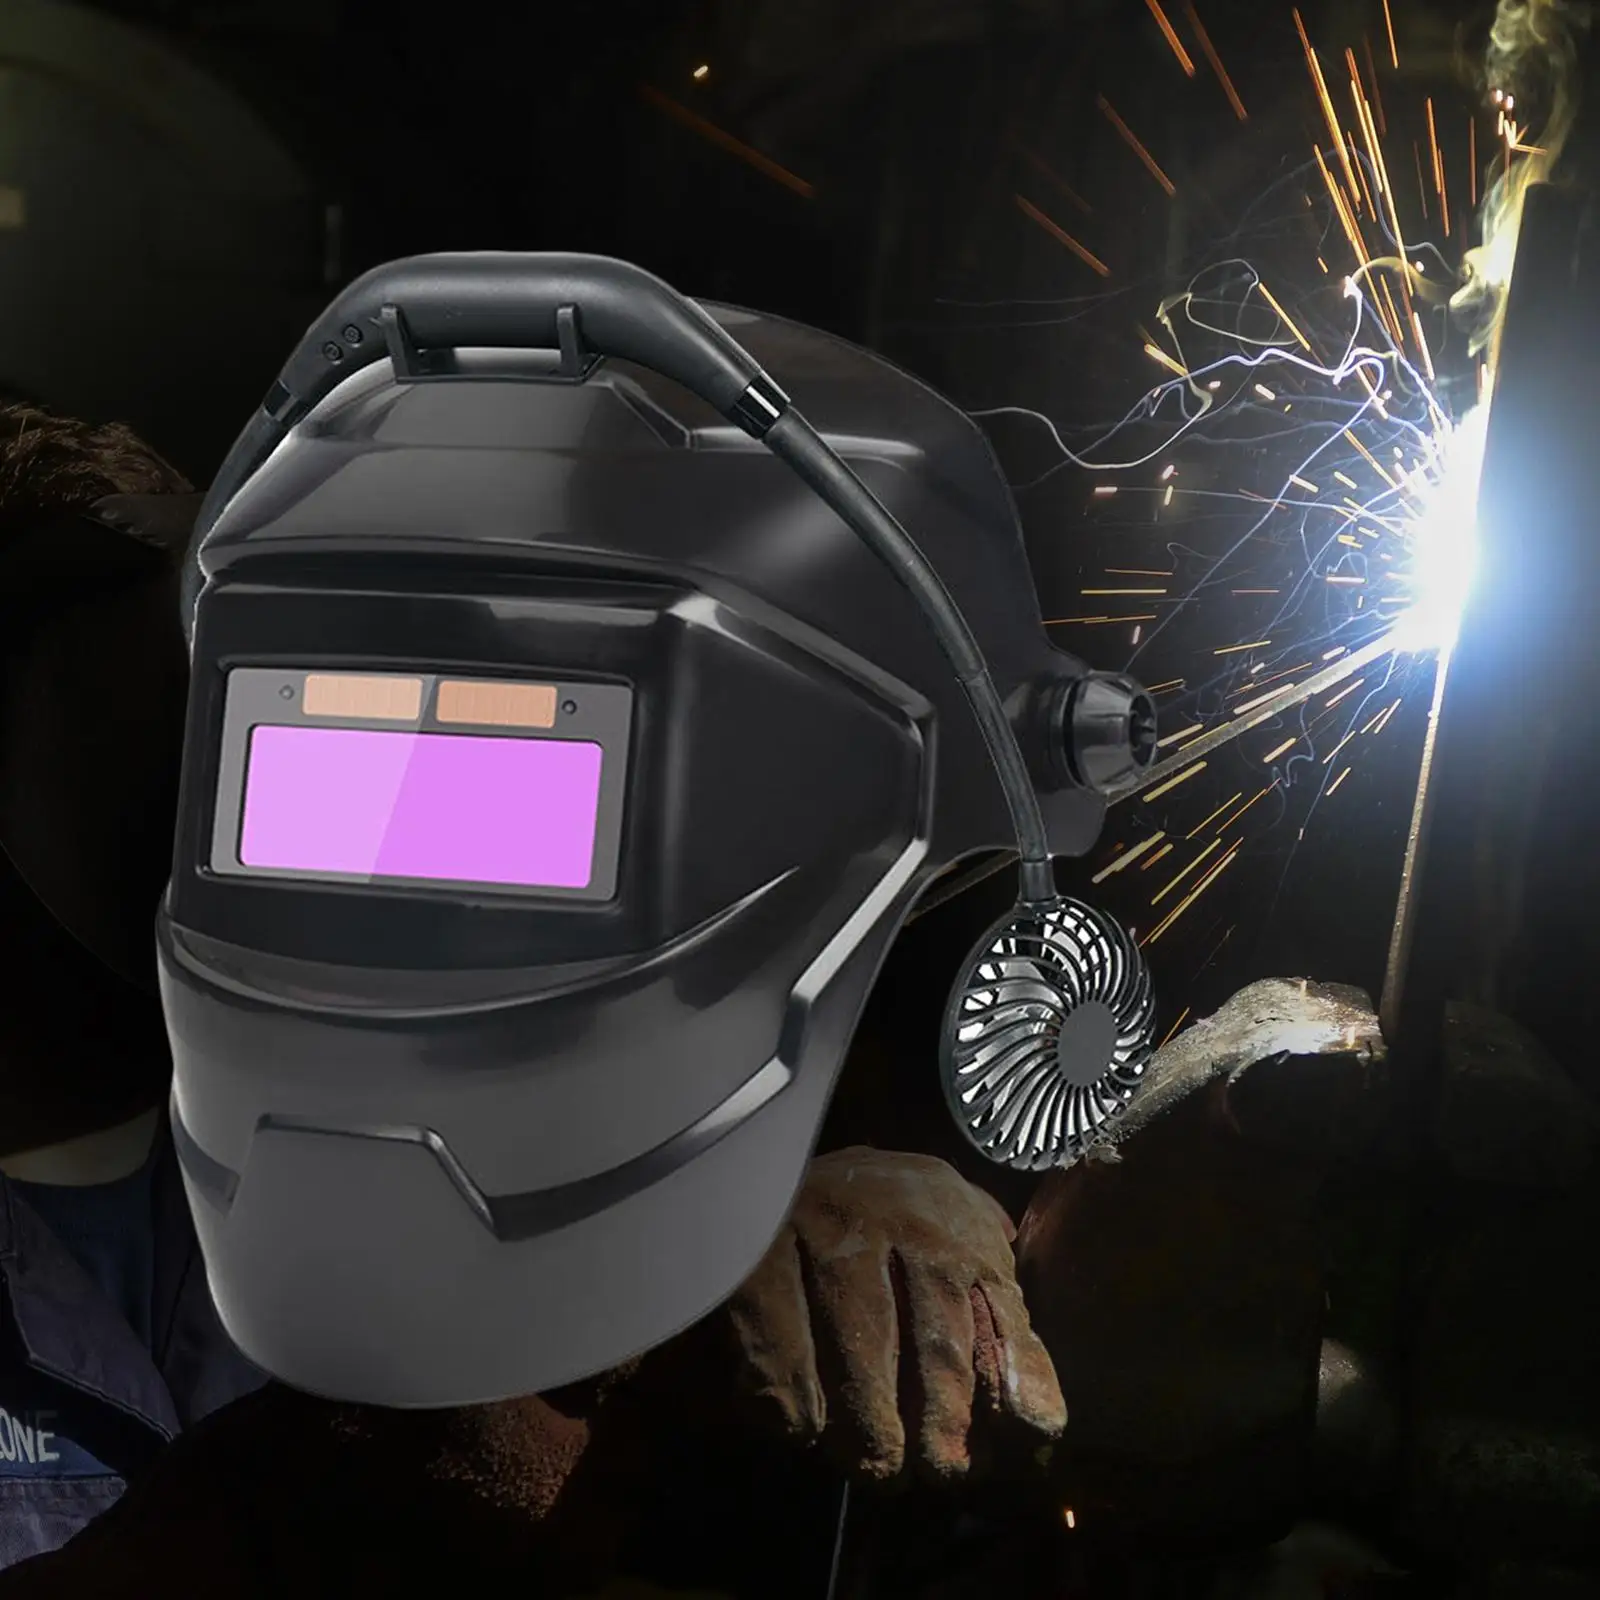 Welding Mask Hood Auto Darkening Welder Mask Comfortable to Wear Professional with Side View Face Protector for Welding Workers